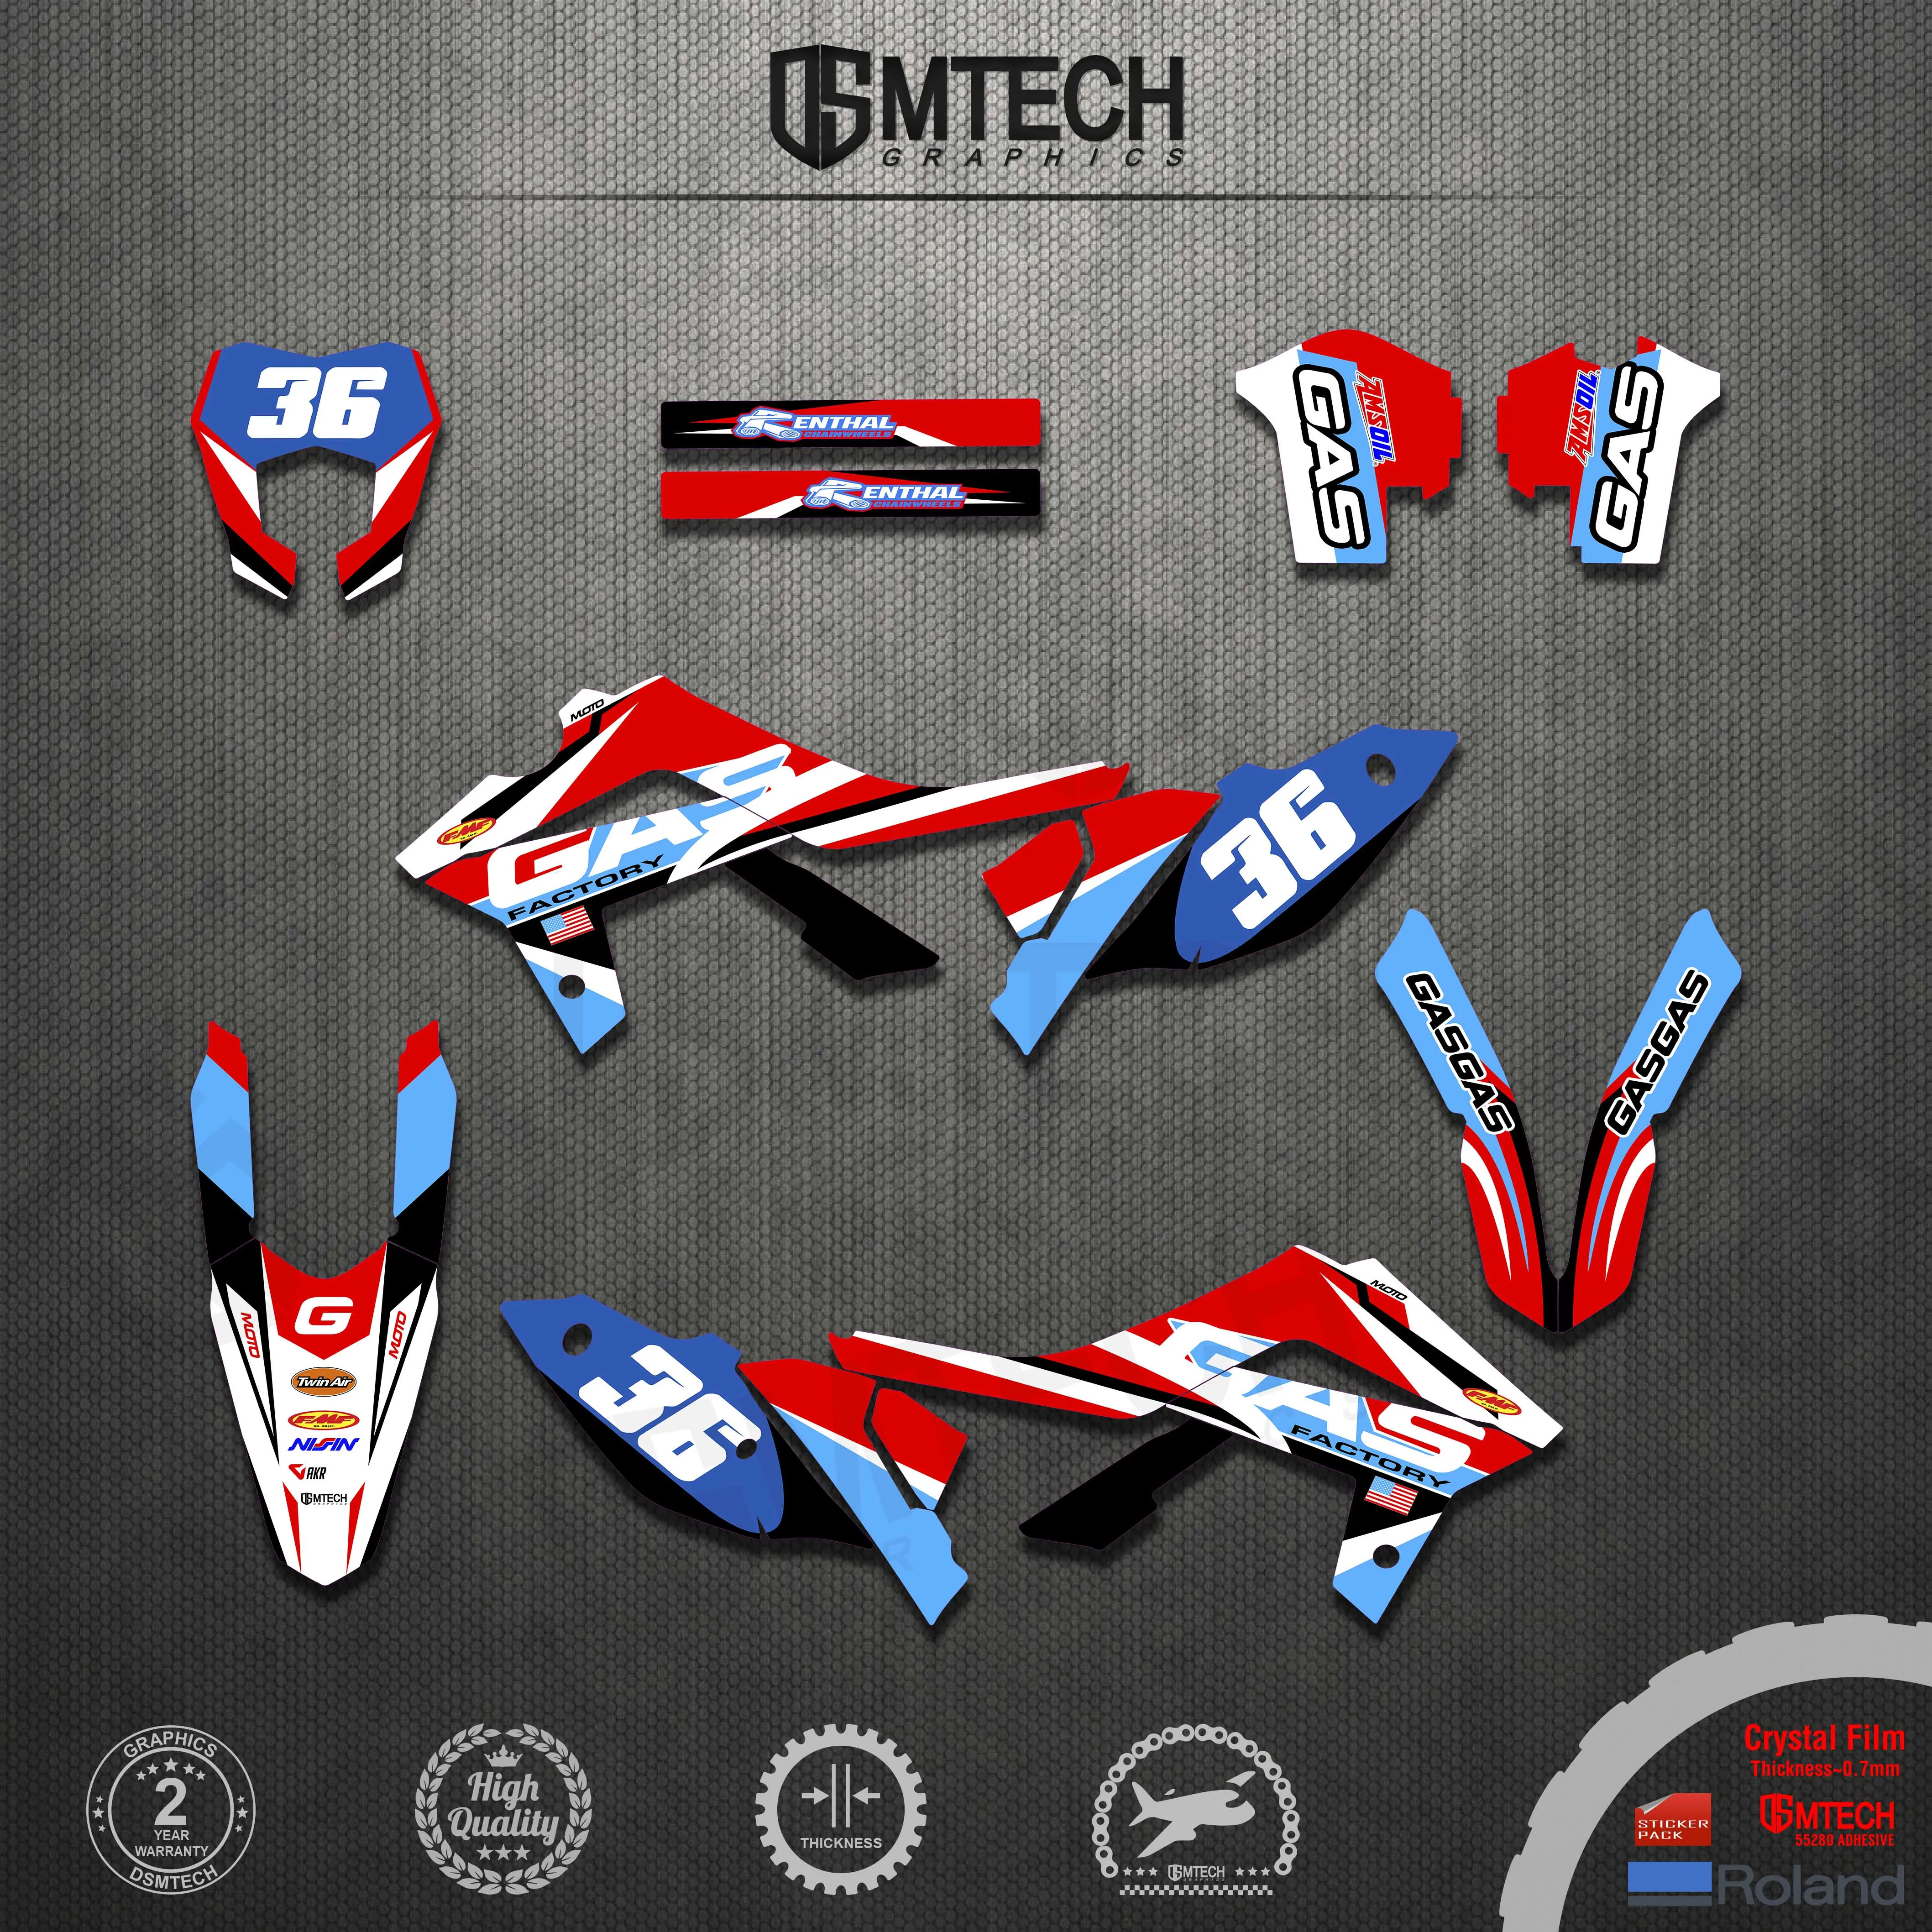 DSMTECH Customized Team Graphics Backgrounds Decals Custom Stickers For GASGAS 2014 2015 2016 2017 EC